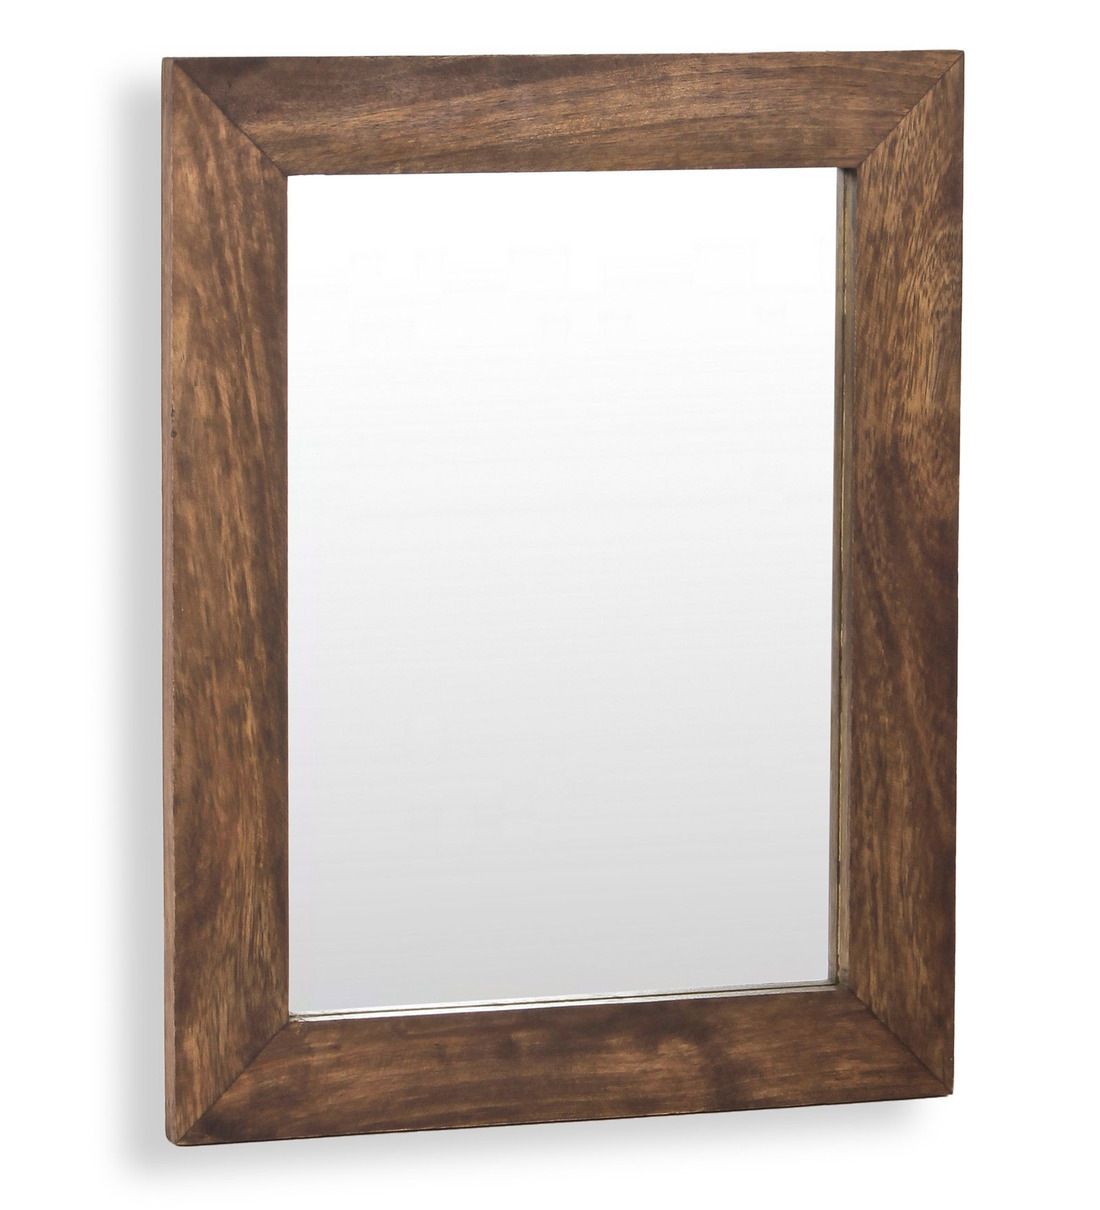 Buy Mango Wood Rectangle Wall Mirror In Walnut Colourfabuliv Online With Walnut Wood Wall Mirrors (View 14 of 15)